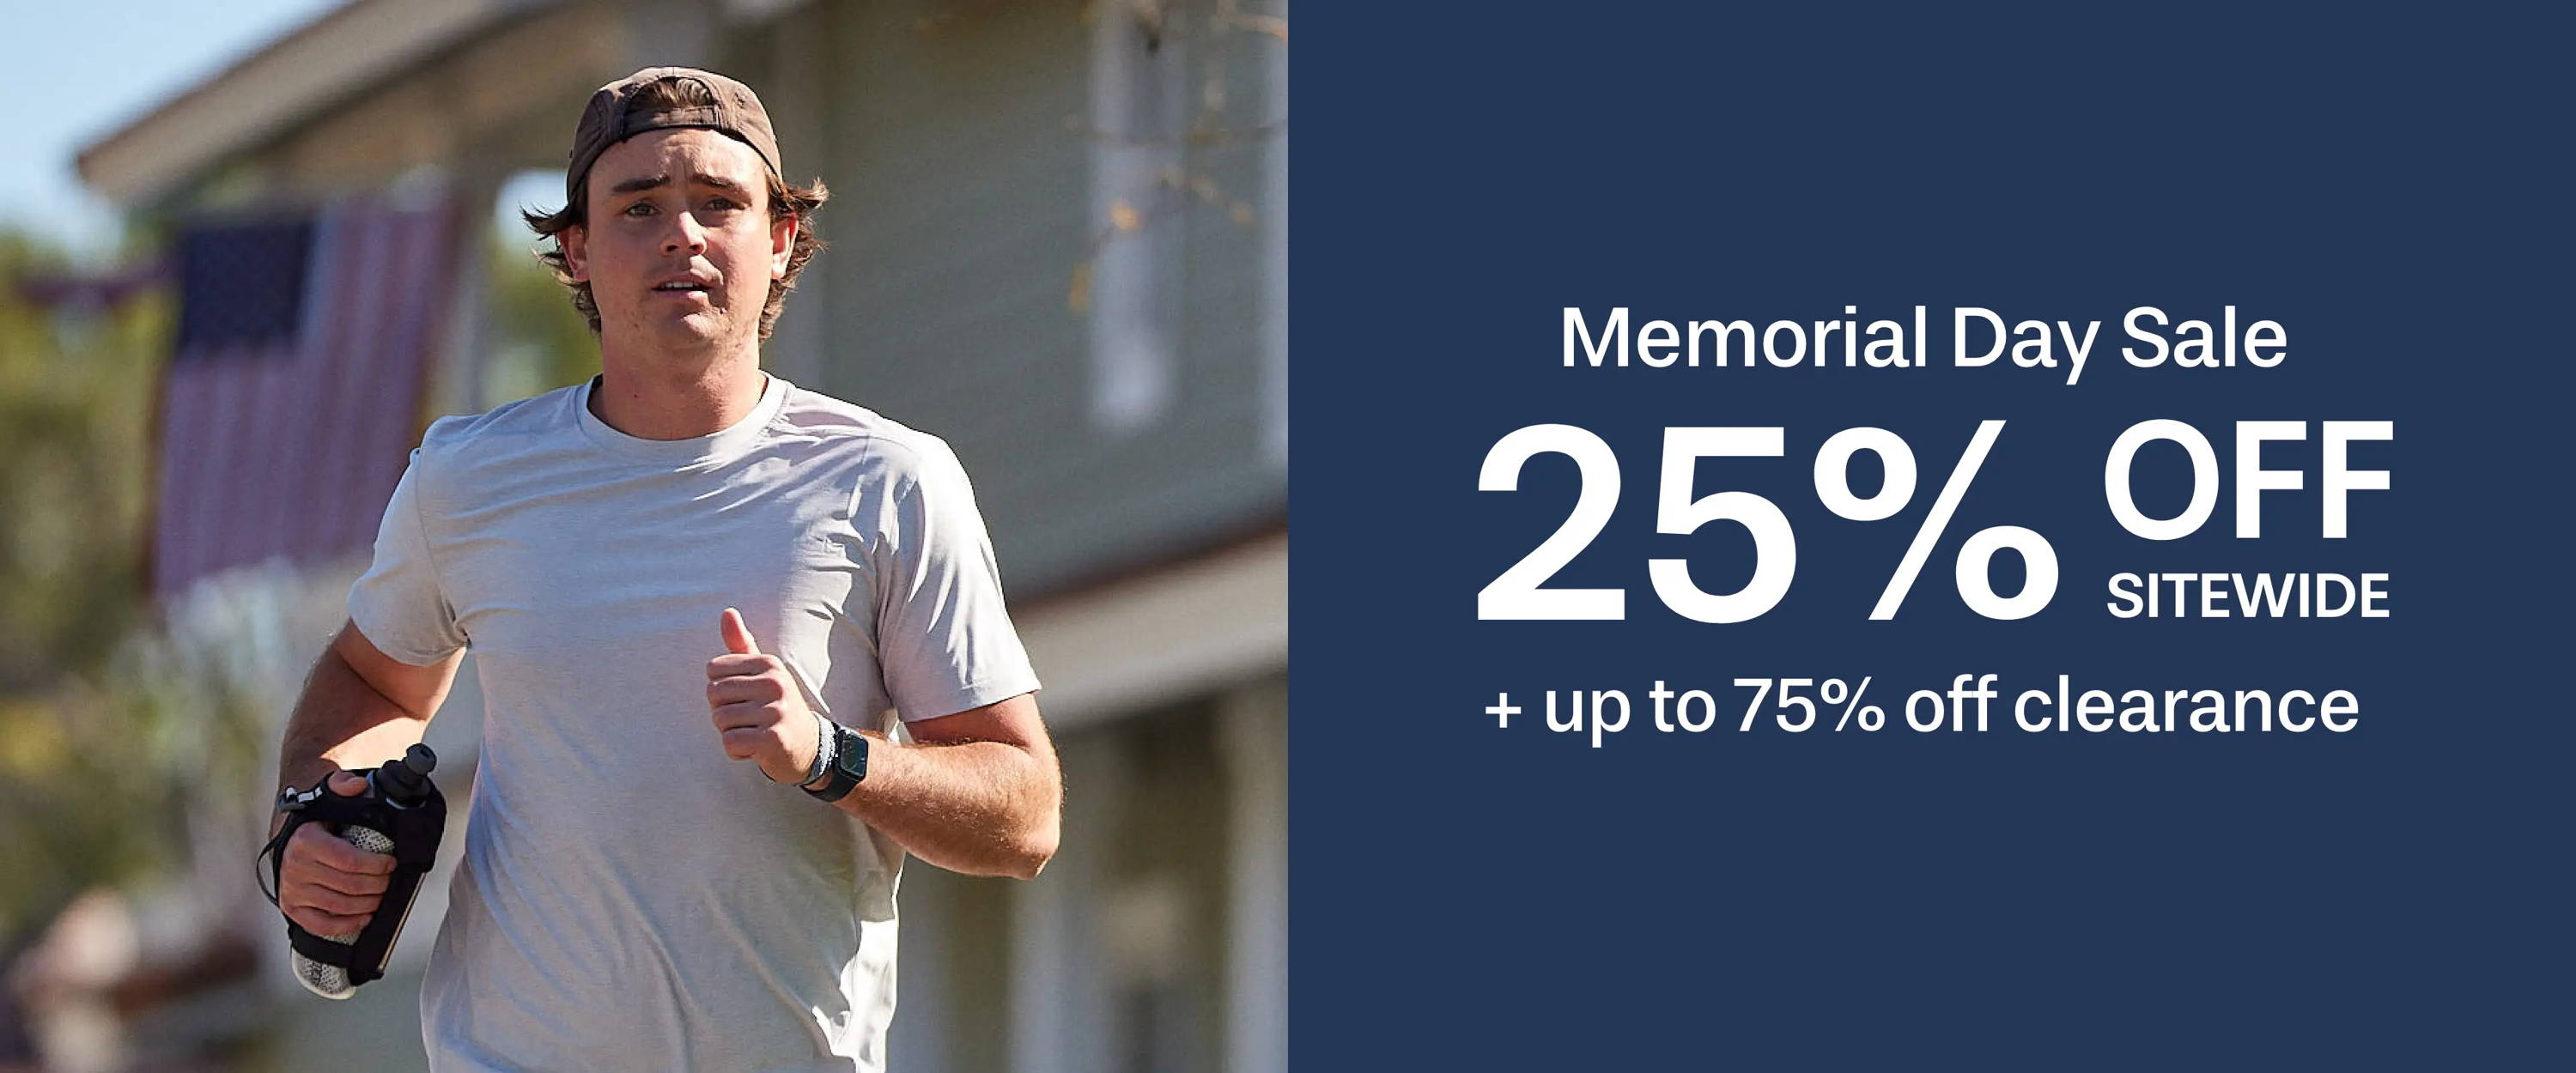 male runner with handheld water bottle on left, Memorial Day Sale 25% OFF Sitewide + up to 75% off clearance on right